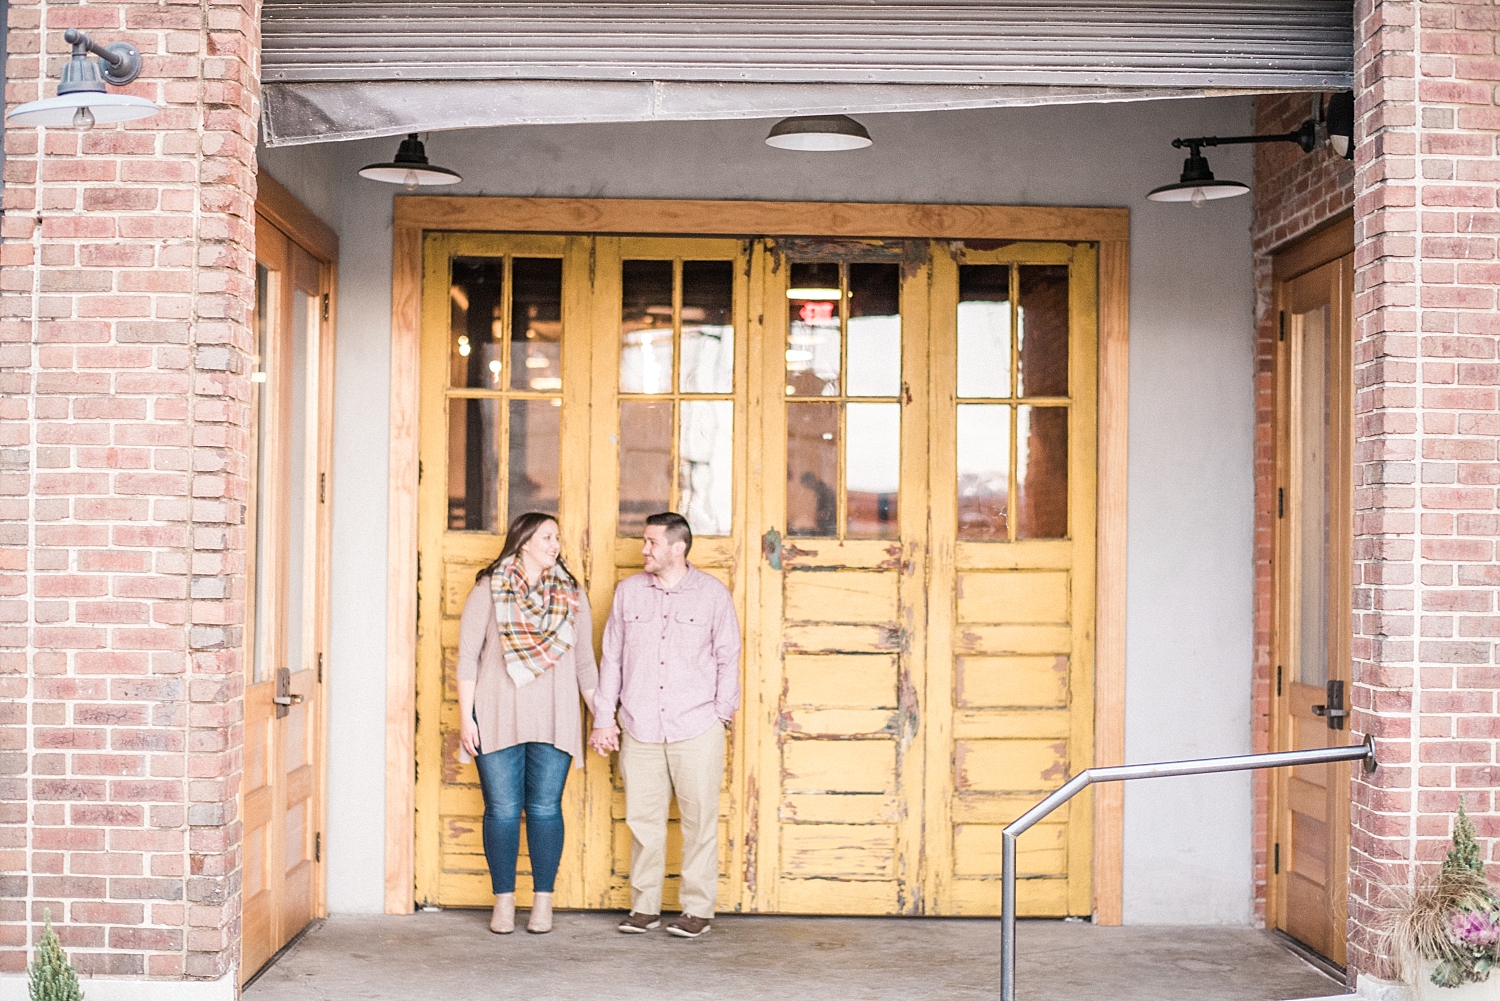 Top places to do engagements in downtown Knoxville | Juicebeats Photography | Knoxville Wedding Photographer | The Standard Knoxville